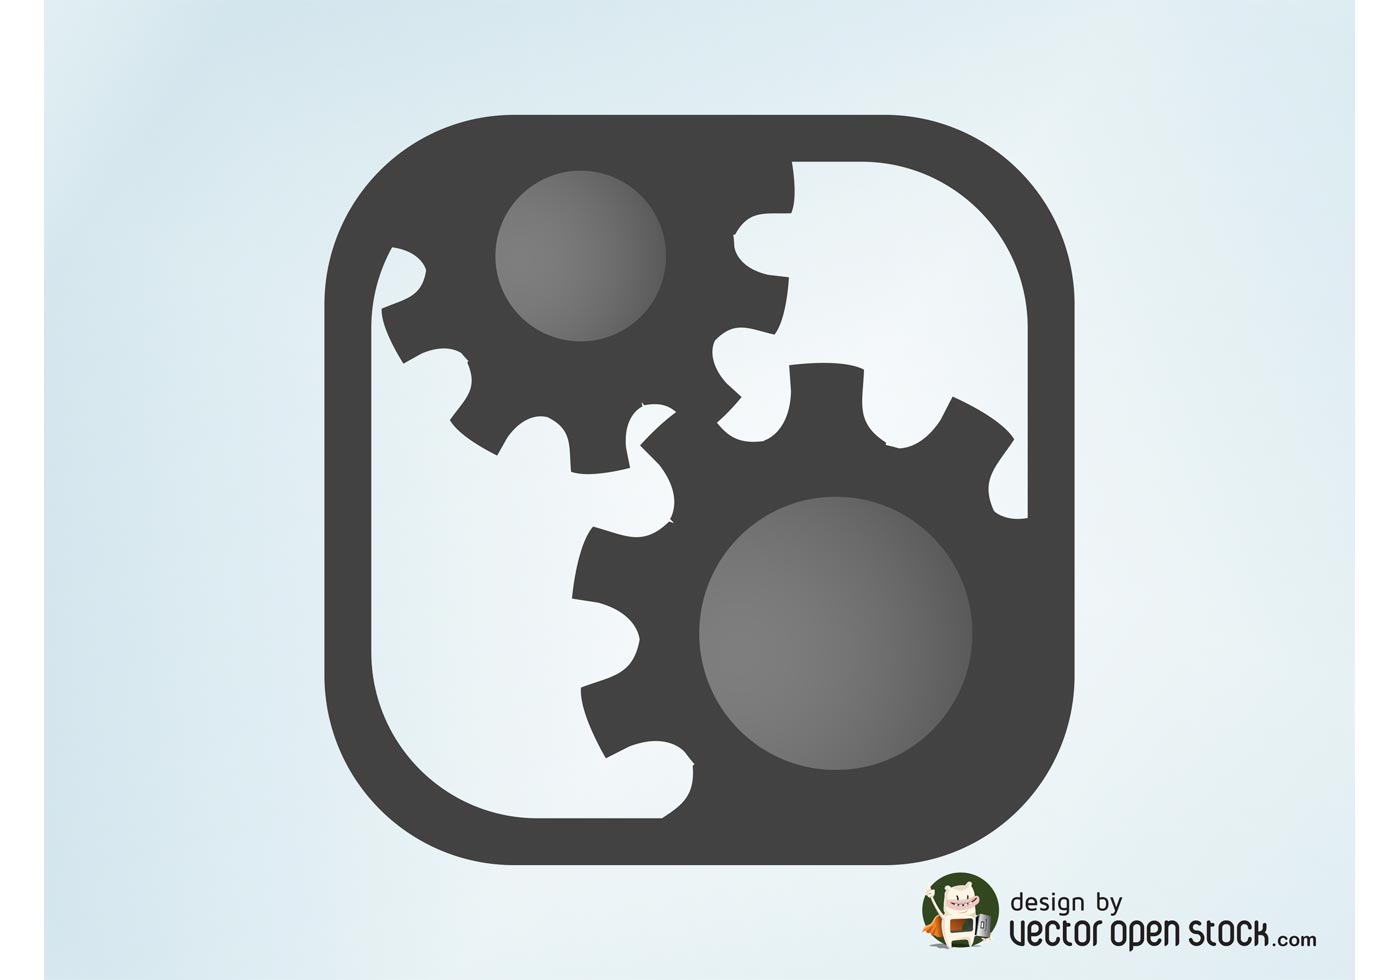 Download Settings Icon - Download Free Vector Art, Stock Graphics & Images